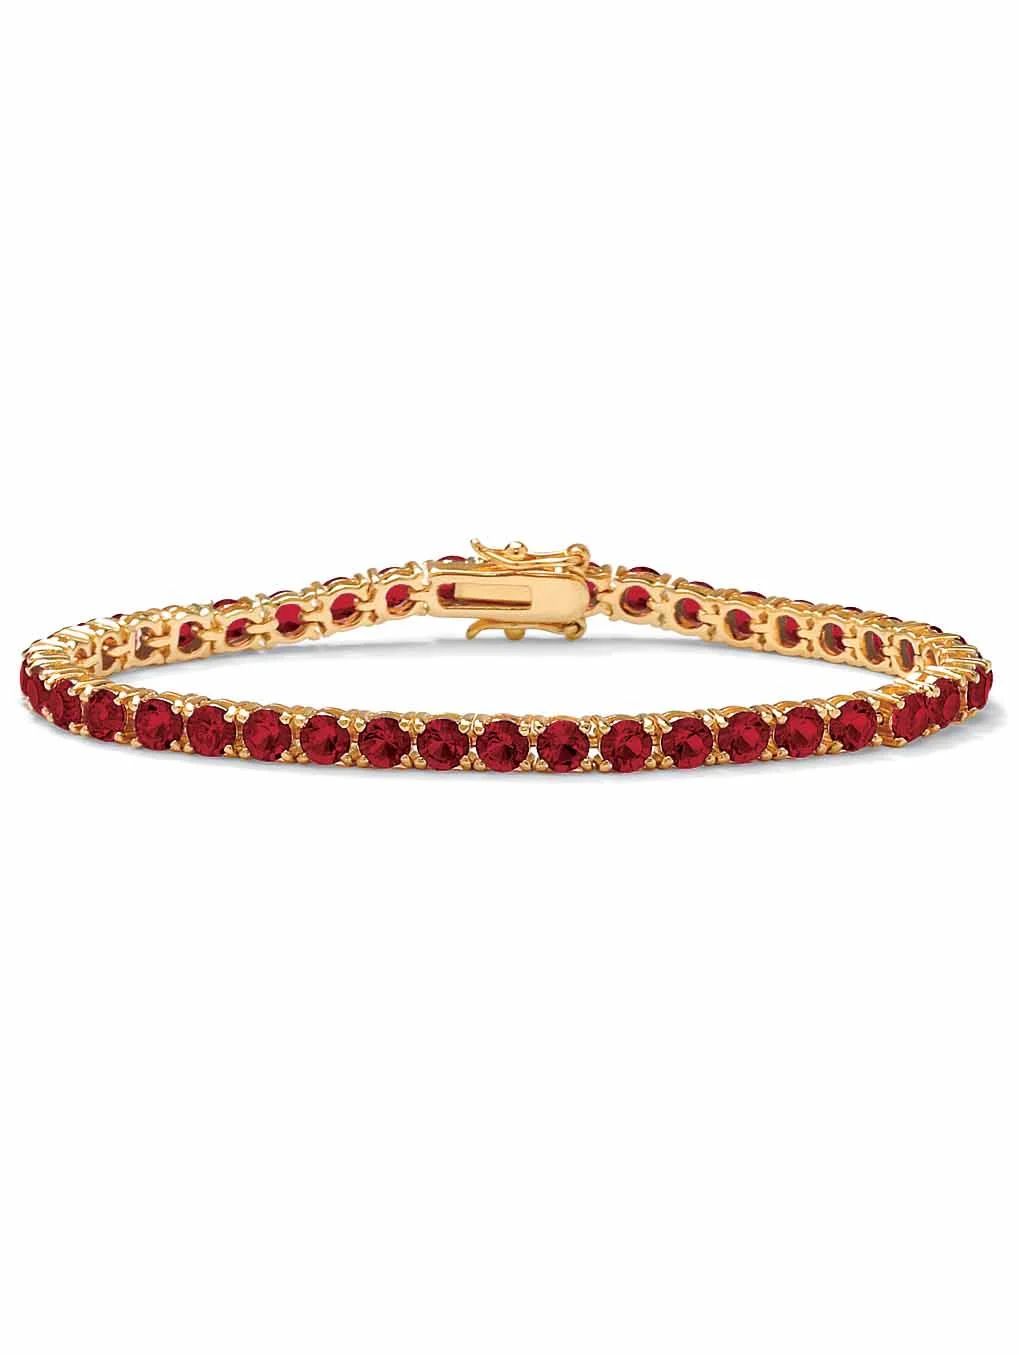 PalmBeach Jewelry Round Simulated Birthstone Tennis Bracelet in Gold-Plated or Silvertone | Walmart (US)